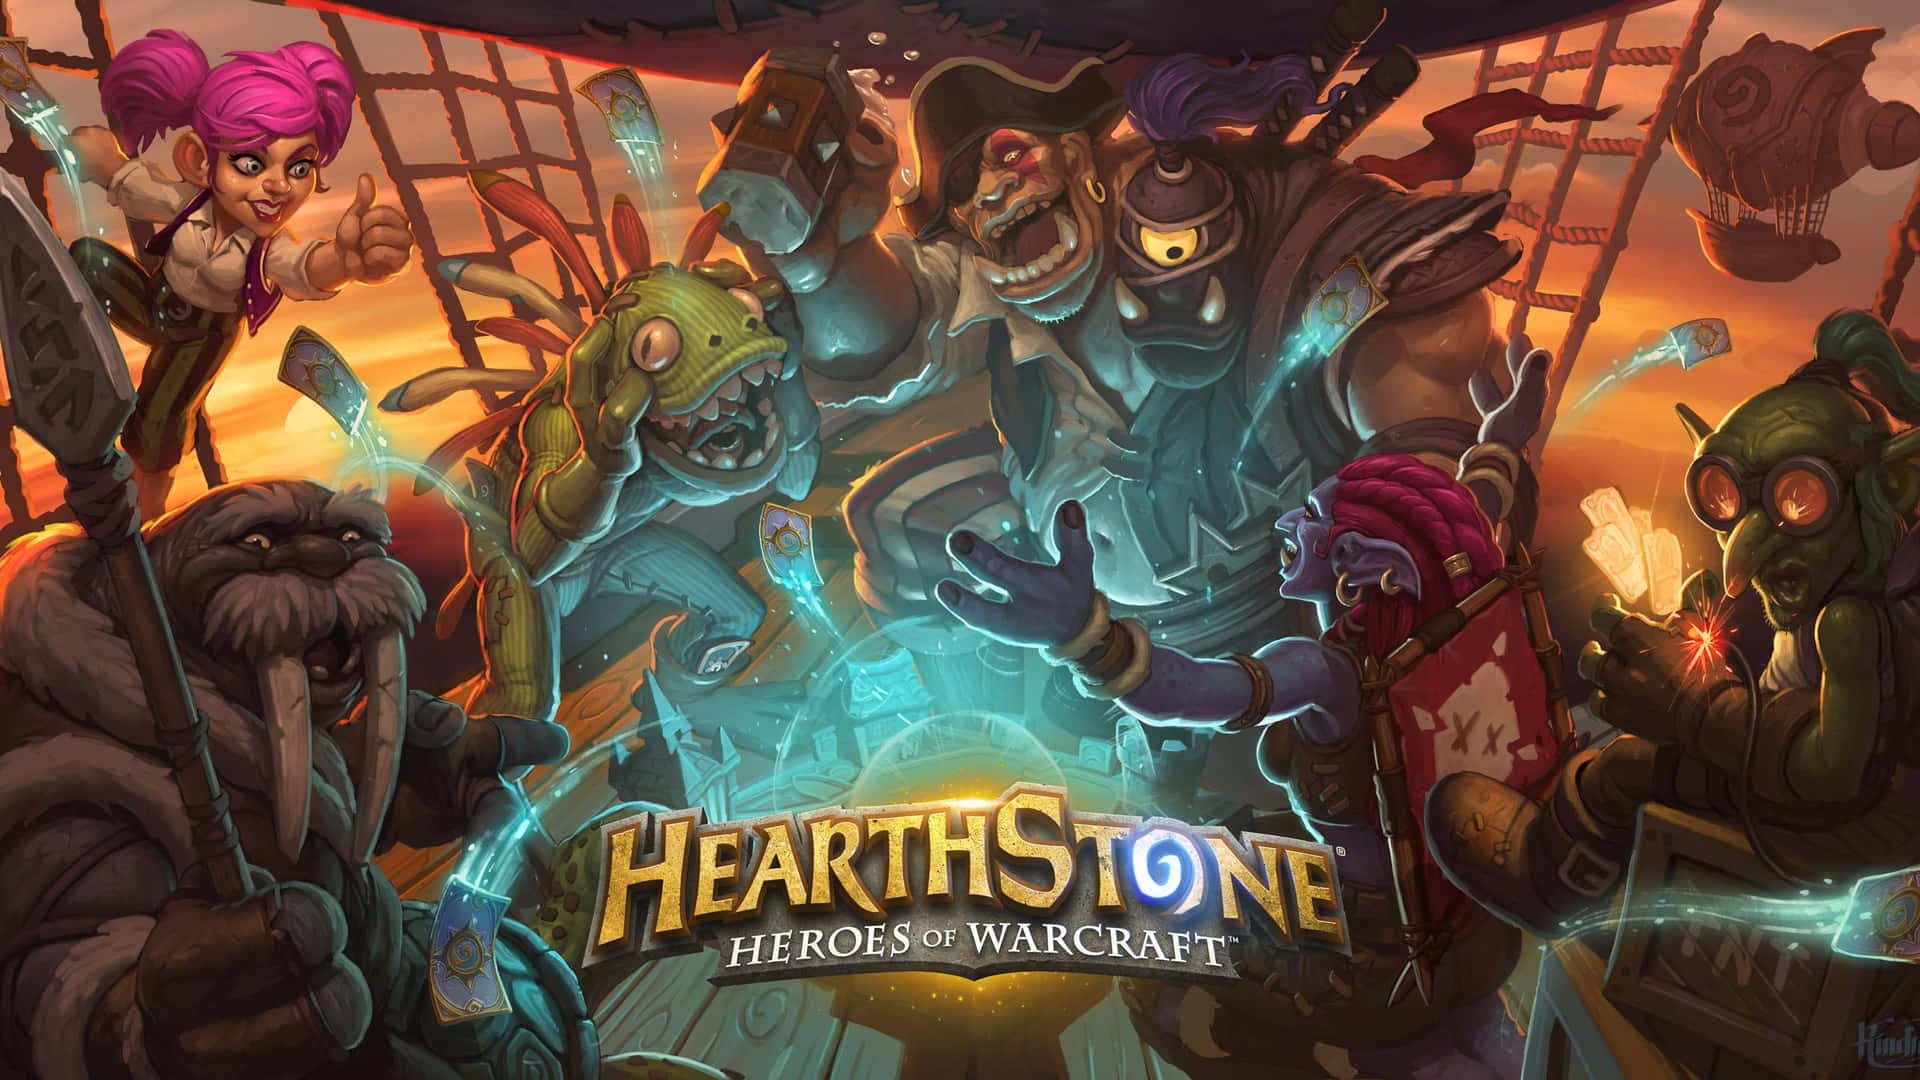 Hearthstone - A Pirate Ship With Characters